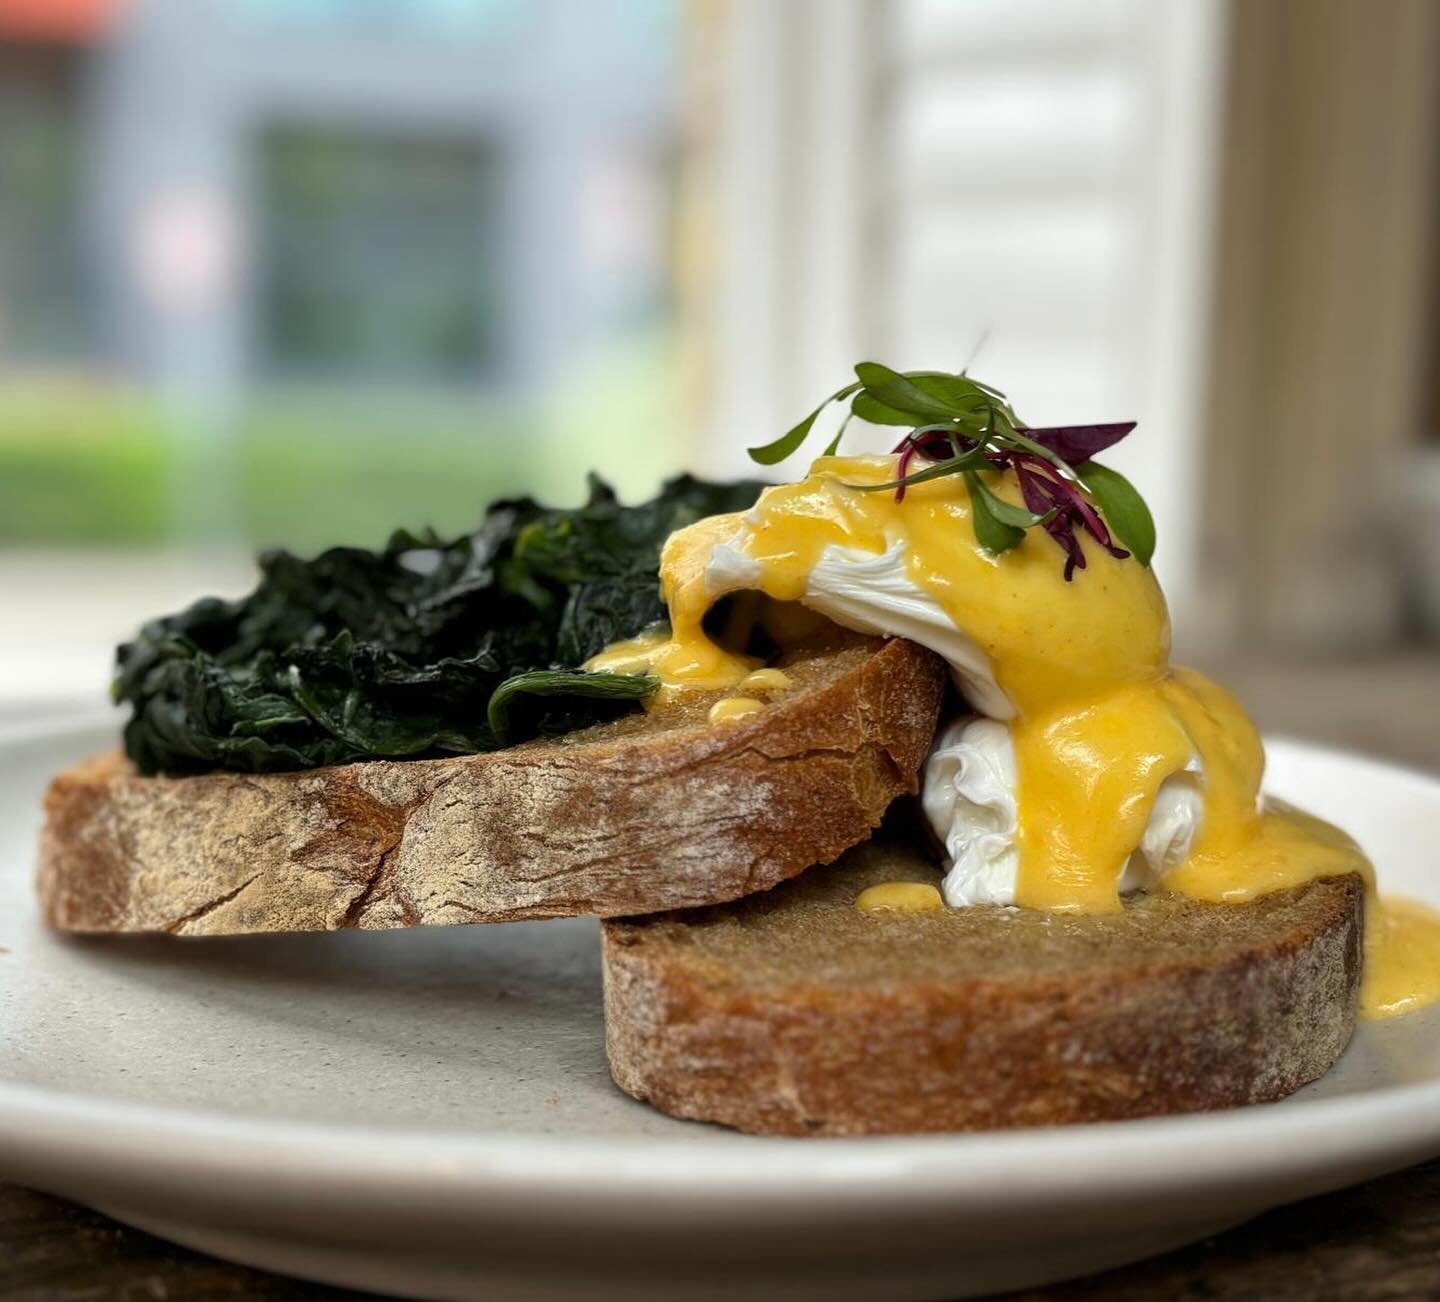 Fancy brunching this weekend?

Get yourself over to Boulangerie Jade with hot food available at your #richmond #woolwich #eastdulwich #victoriapark and #royalstandard stores 👌

#londonbrunchspots #londonbrunchguide #londonbrunchfest #weekendinlondon